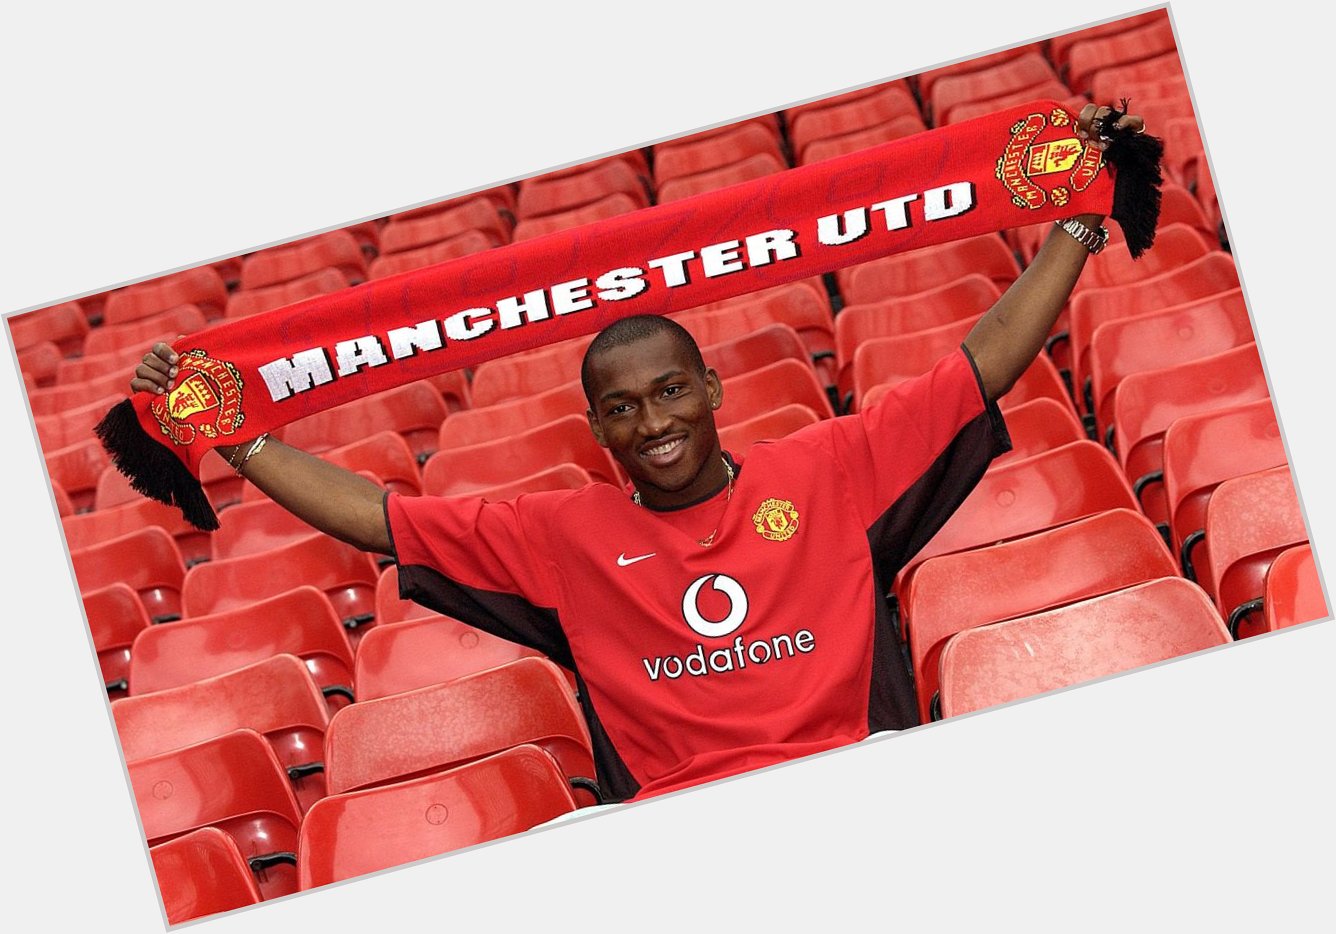 And happy birthday to Eric Djemba-Djemba, of course. 